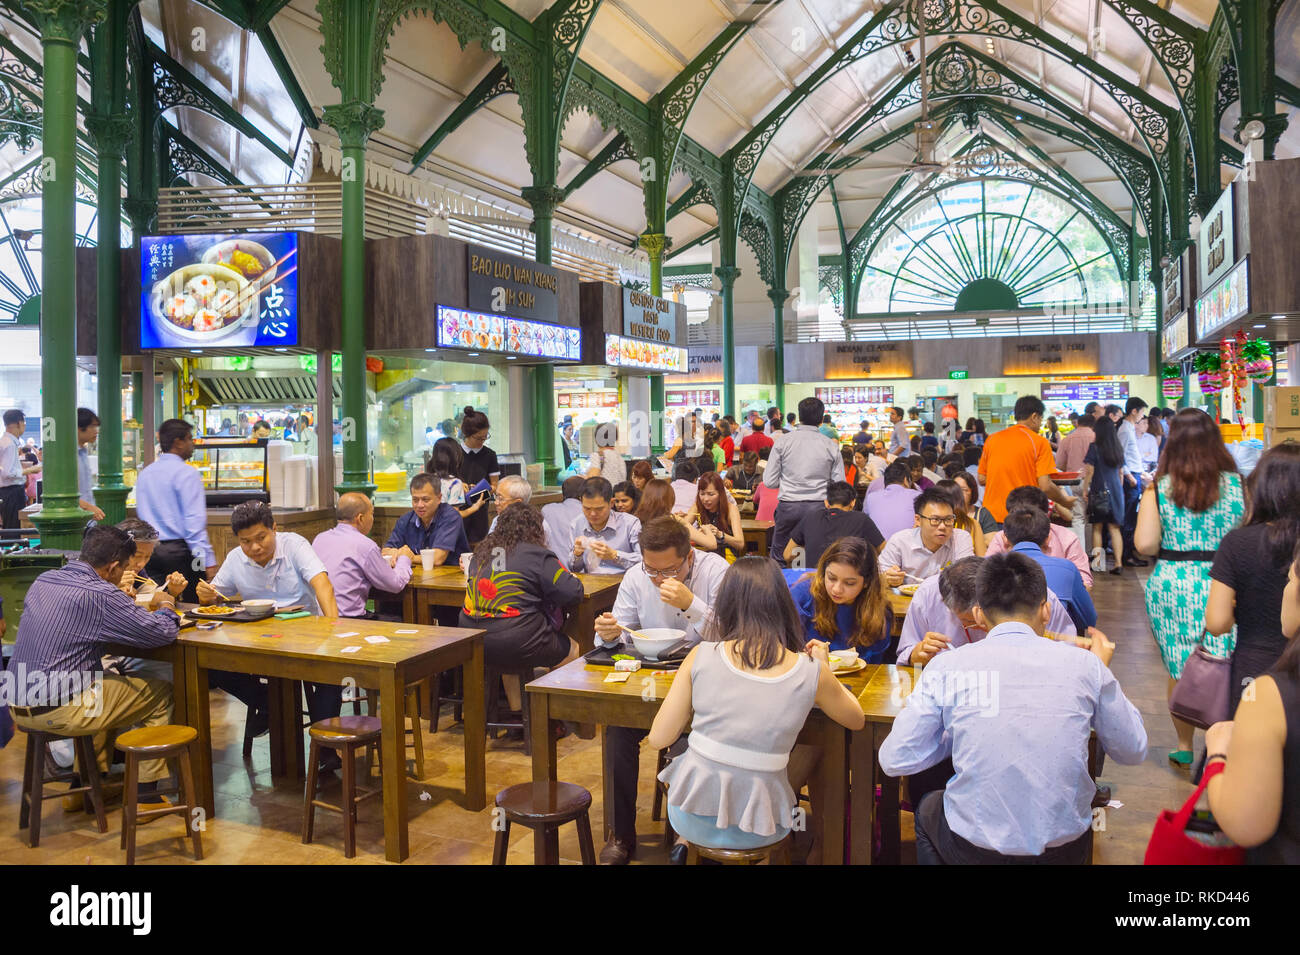 SINGAPORE - JAN 16, 2017 : People at popular food court in Singapore. Inexpensive food stalls are numerous in the city so most Singaporeans dine out a Stock Photo